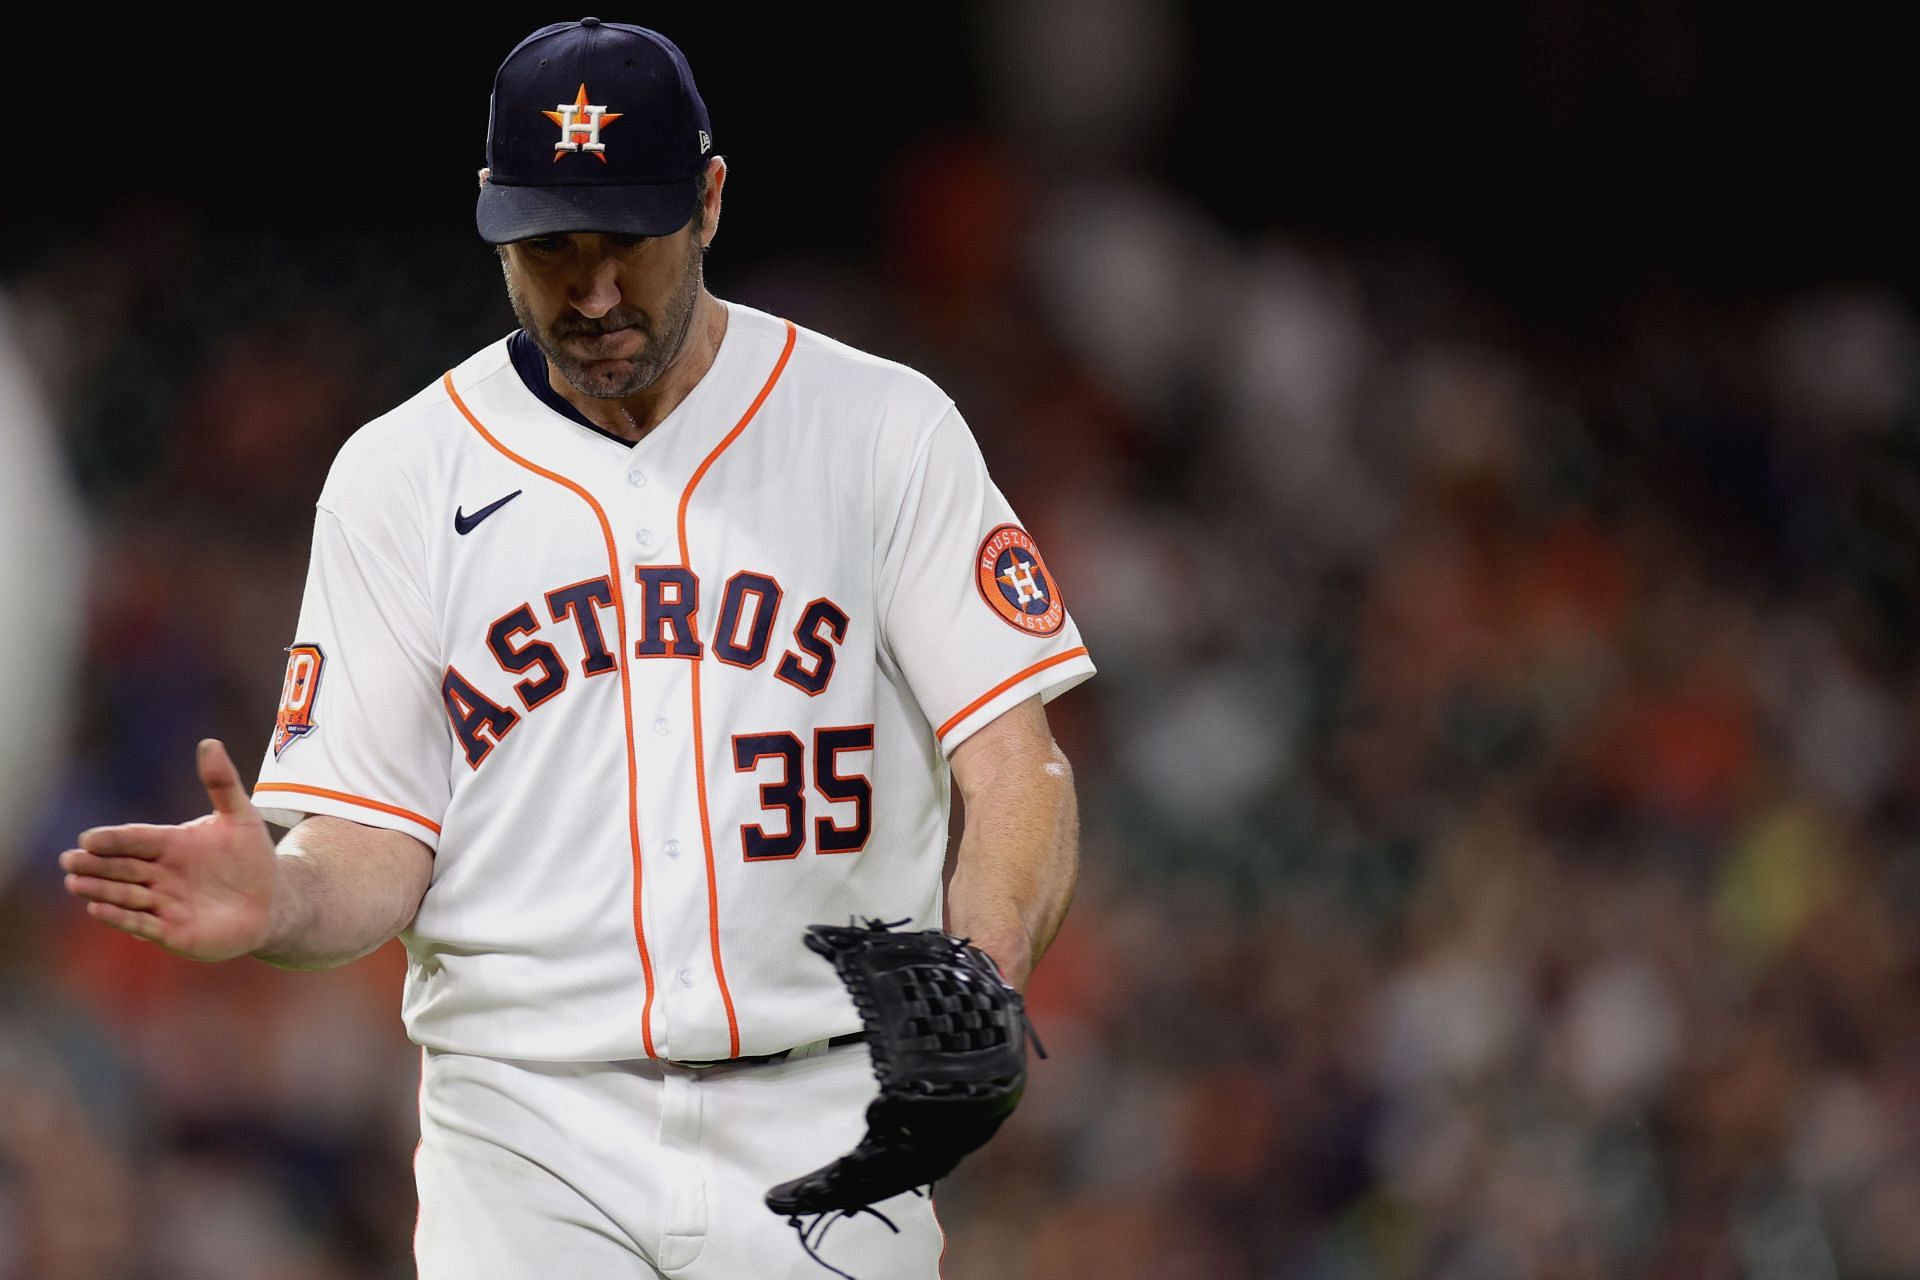 Verlander pitches for the Astros in a game against the Seattle Mariners.